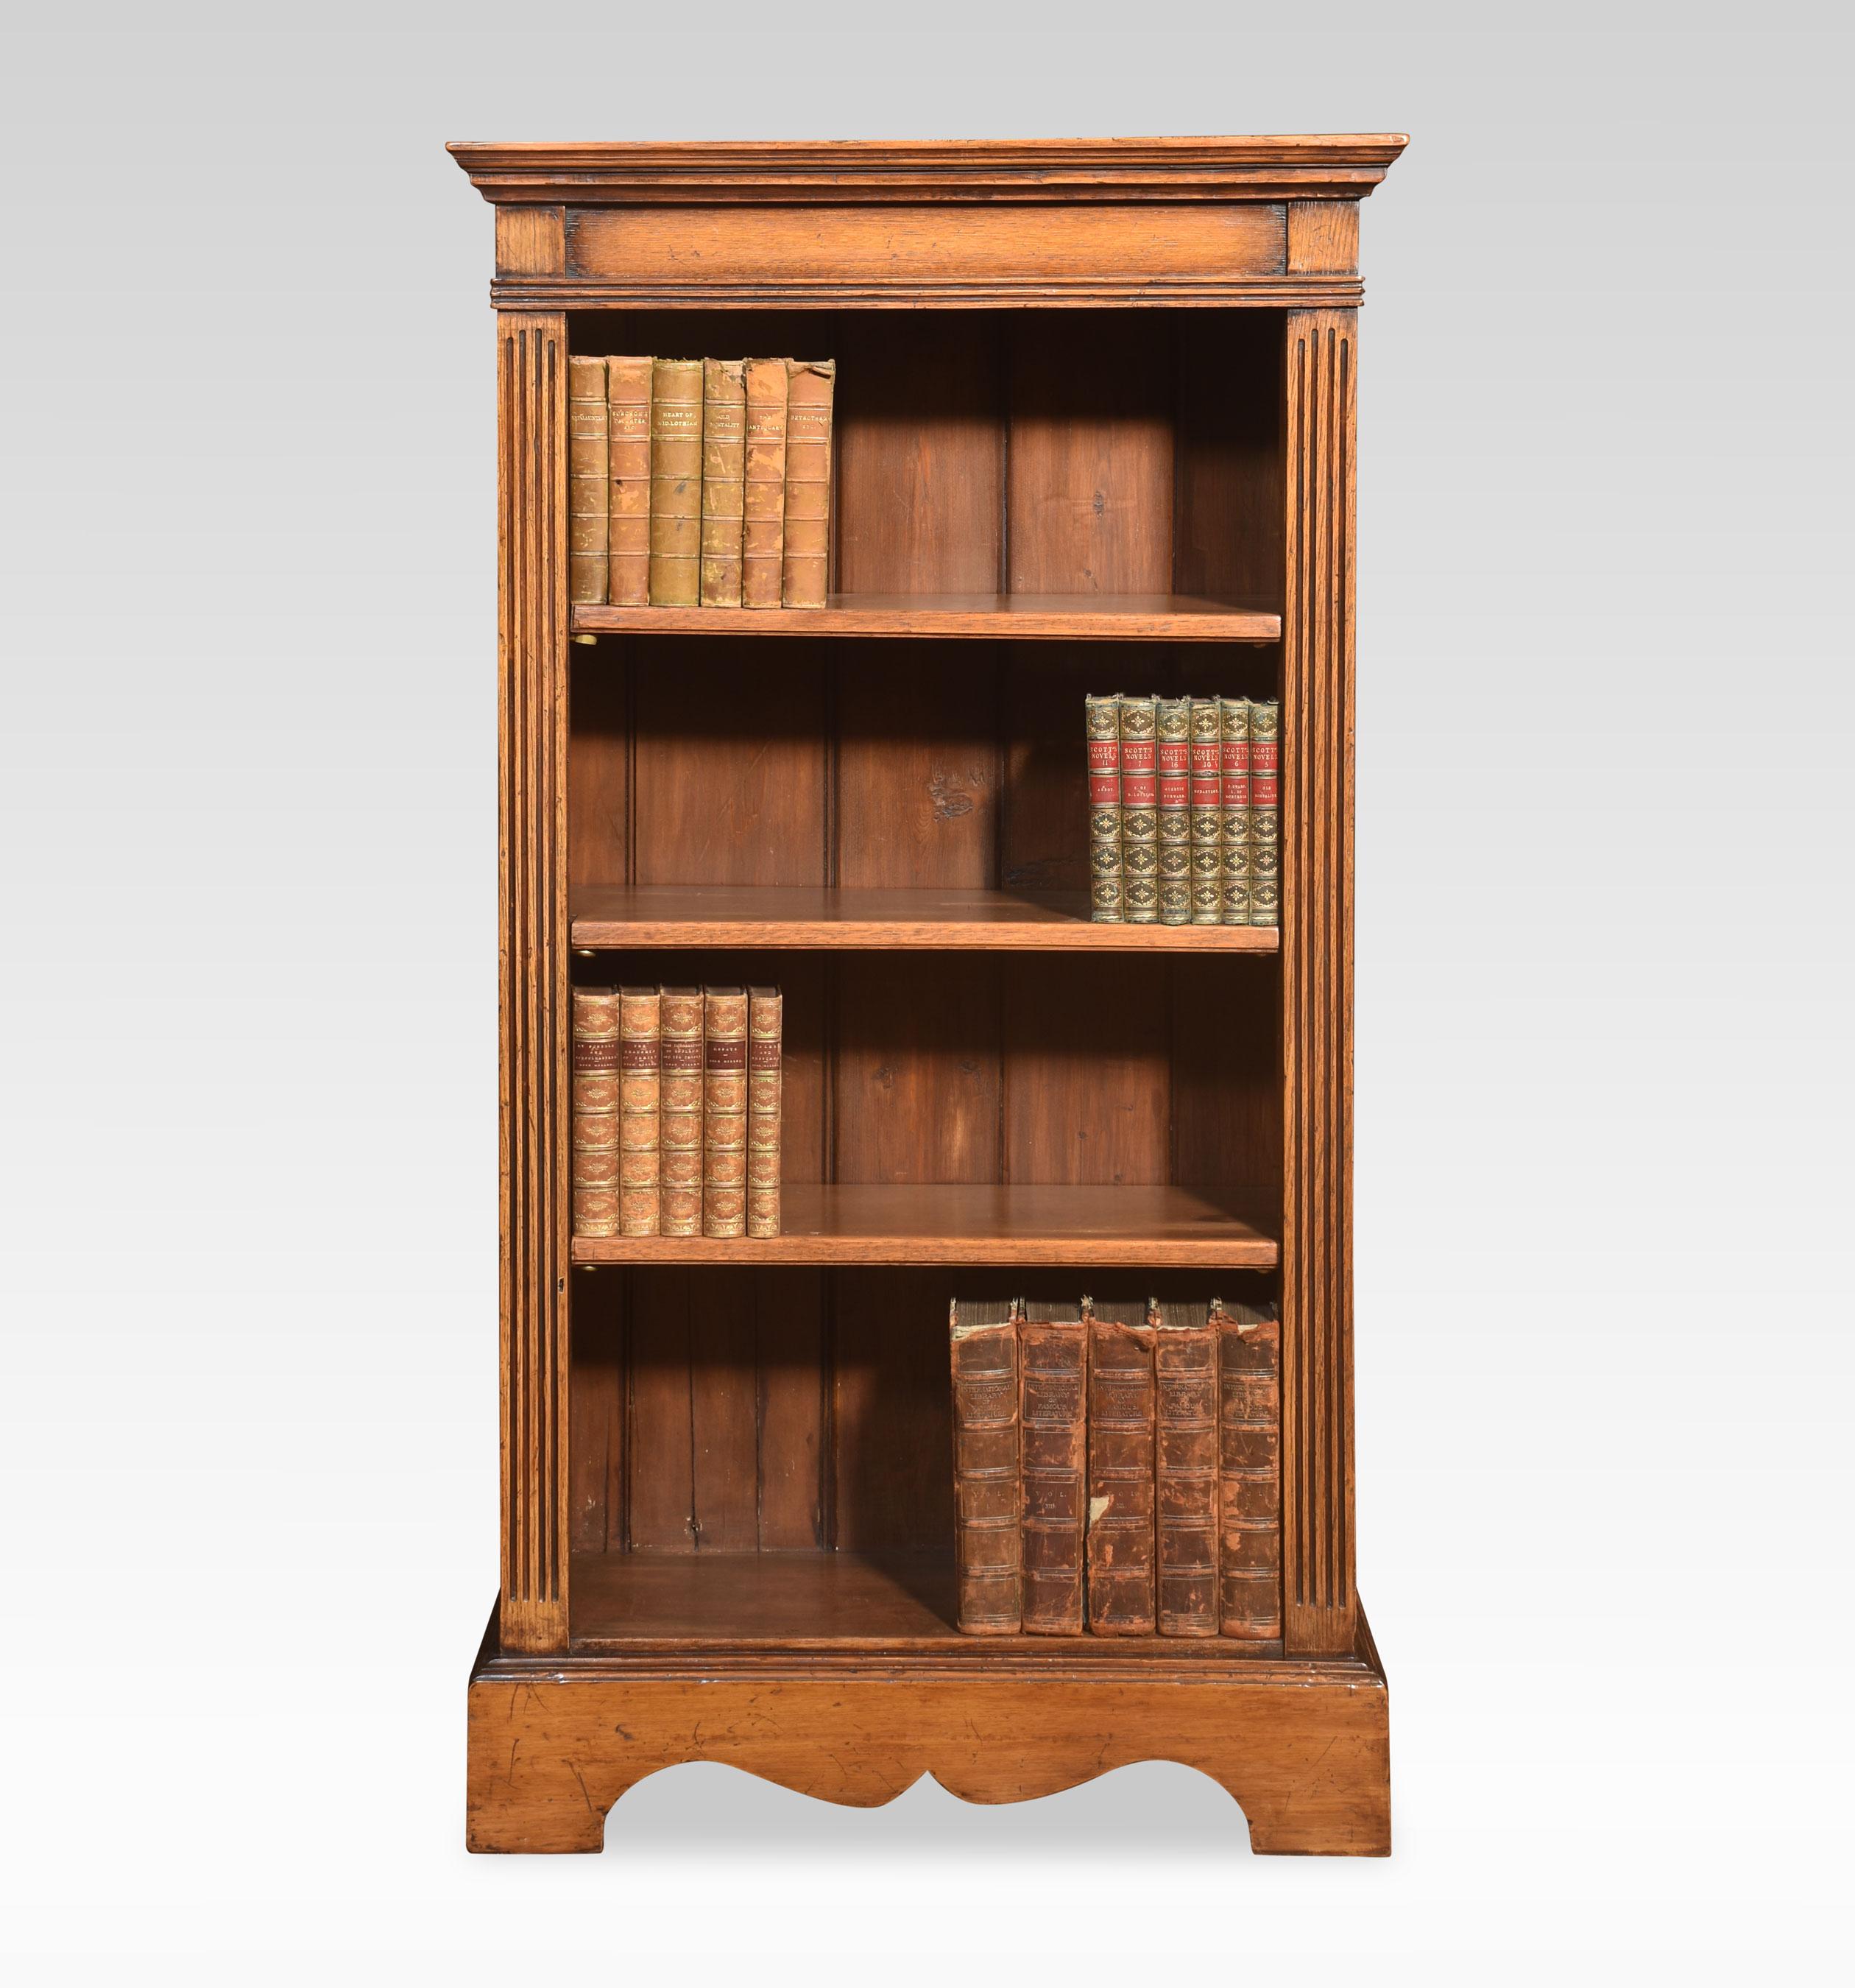 Pair of oak open bookcases, the rectangular top above moulded edge. To the adjustable shelved interior flanked by reeded columns. All raised on a plinth base.
Dimensions
Height 51.5 Inches
Width 28.5 Inches
Depth 11 Inches